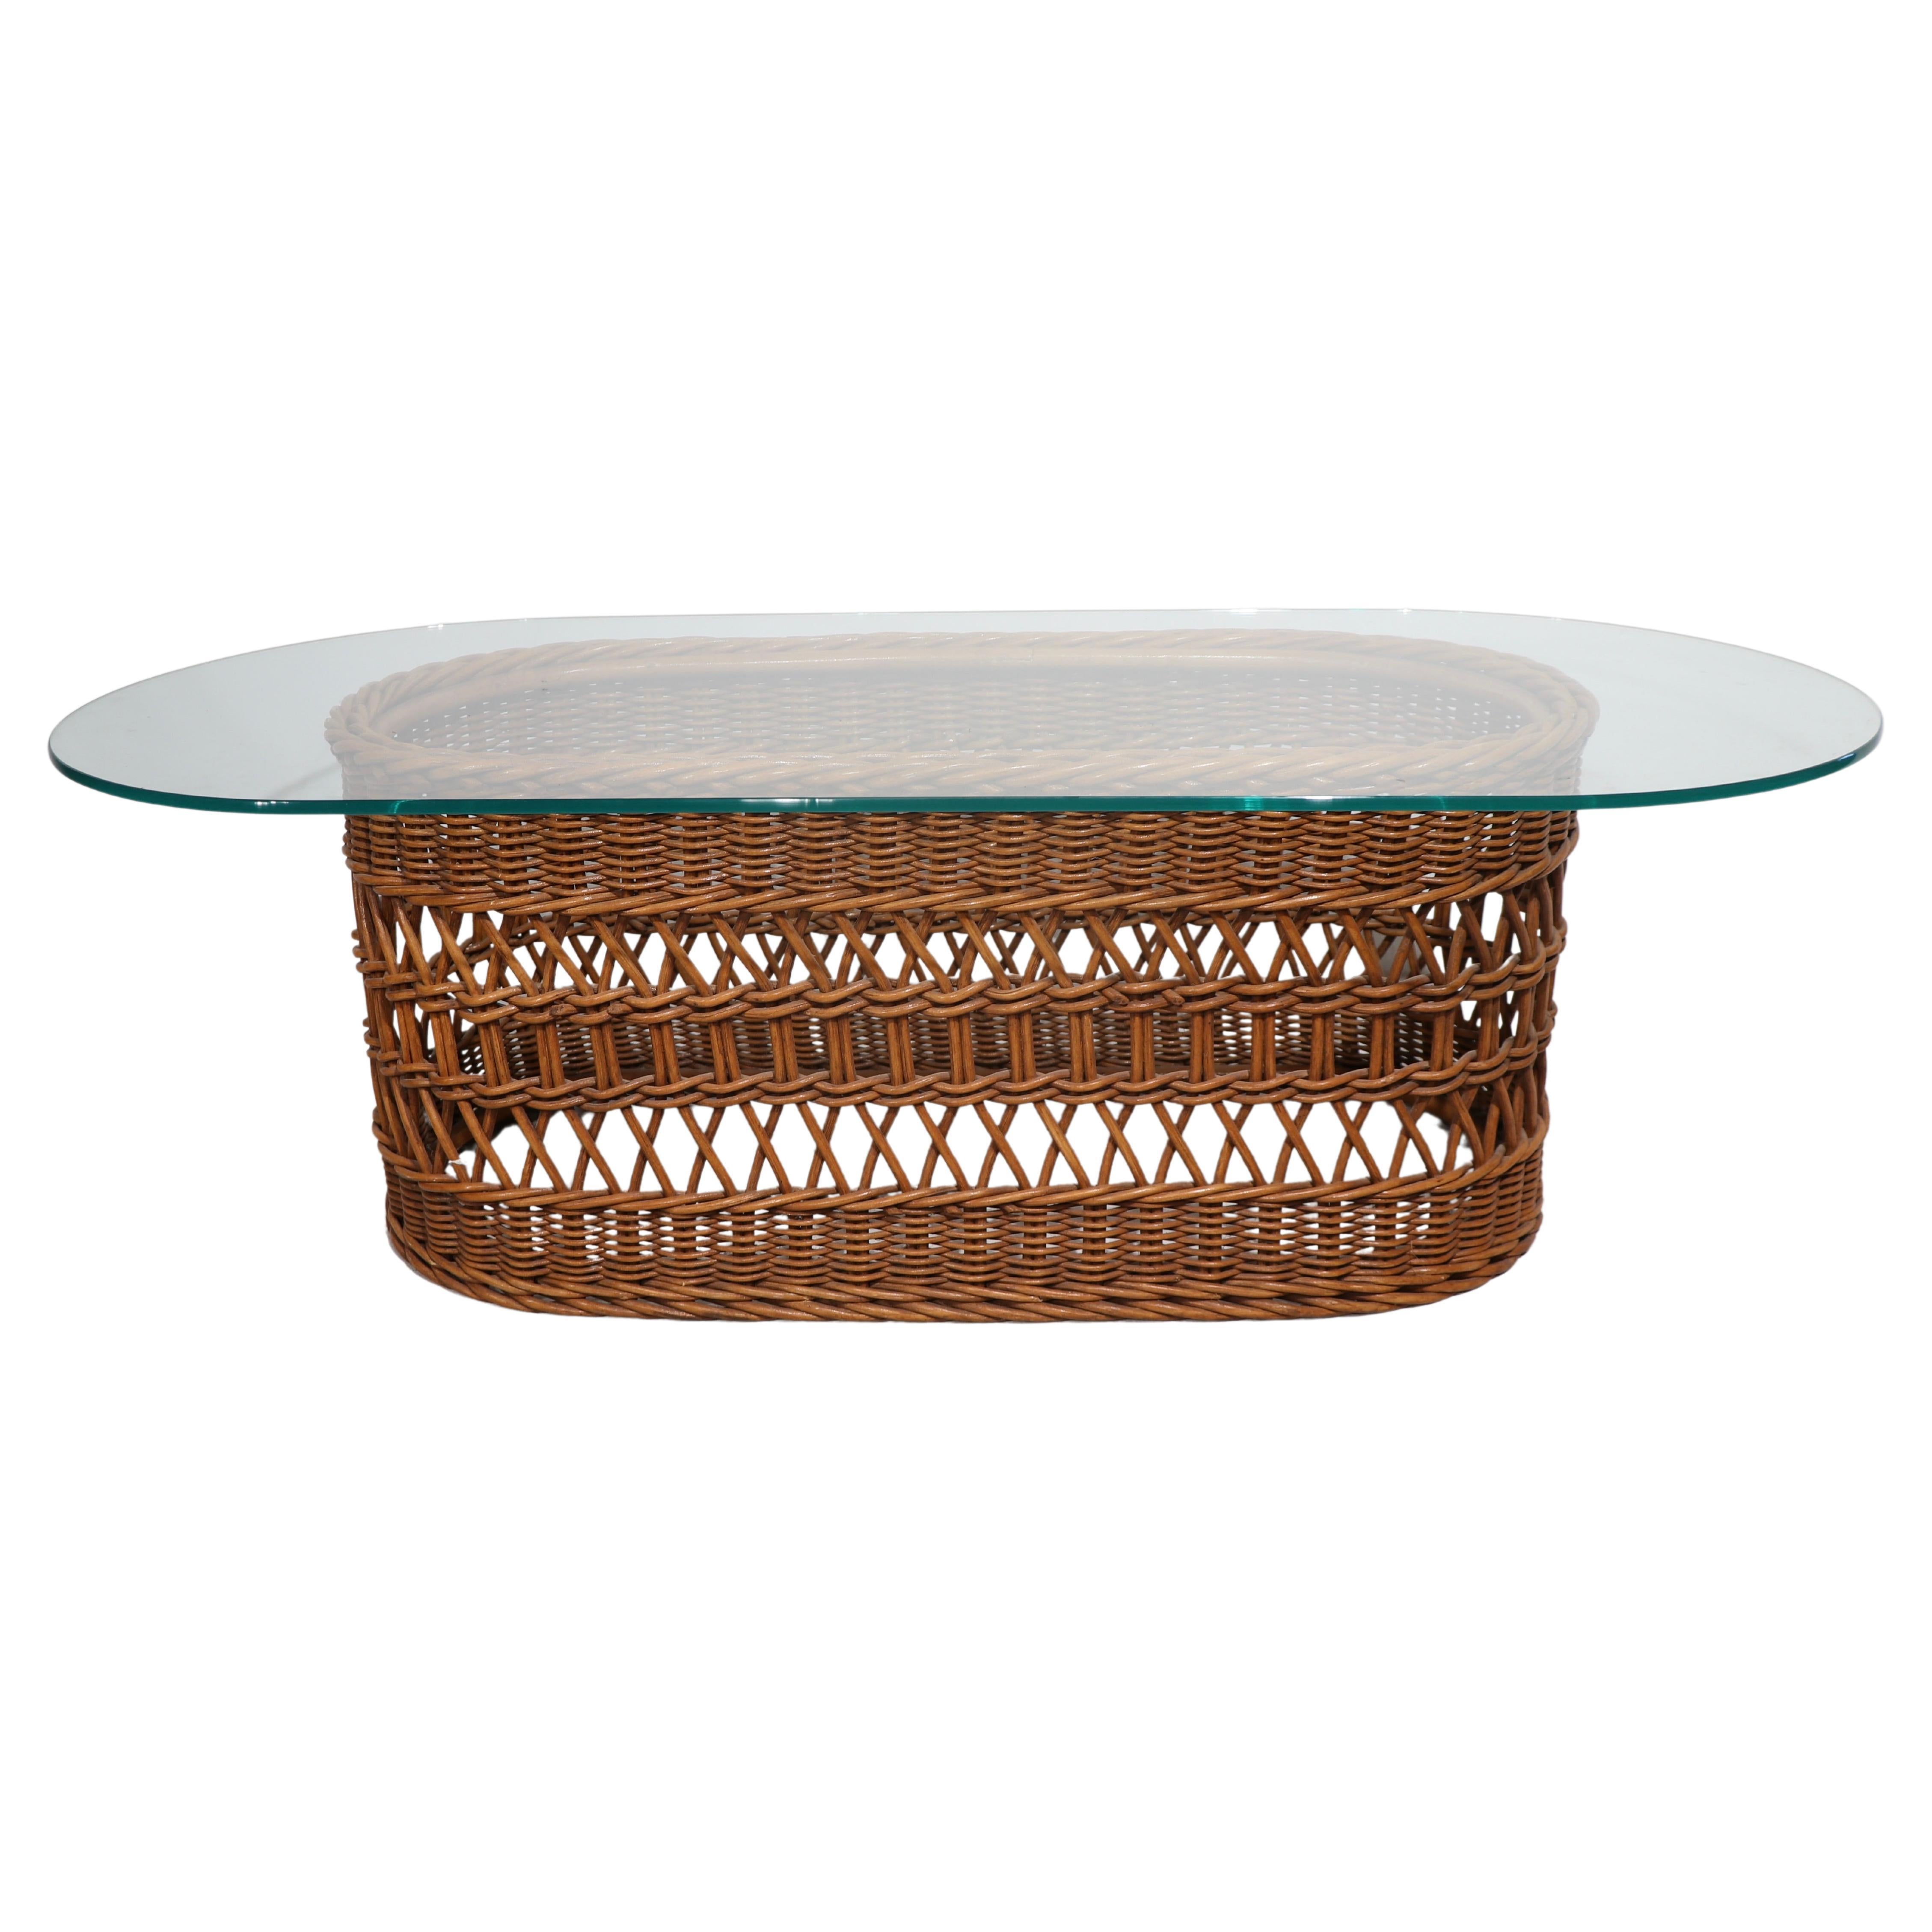  Oval Woven Wicker and Glass Coffee Table circa 1970's For Sale